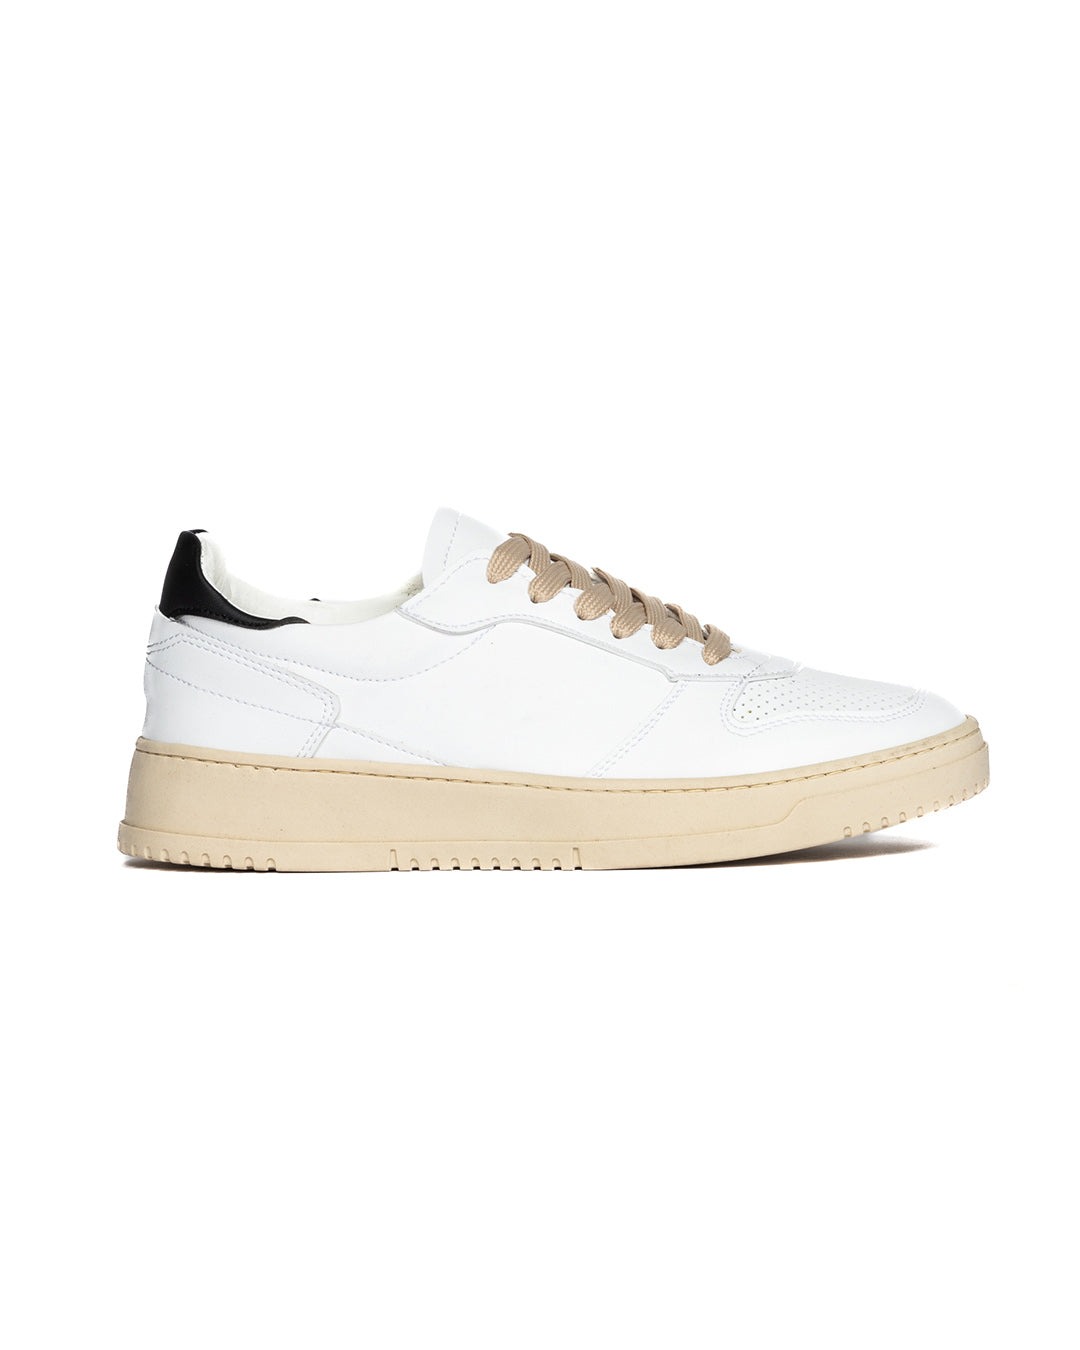 S07 - white leather sneakers with black details